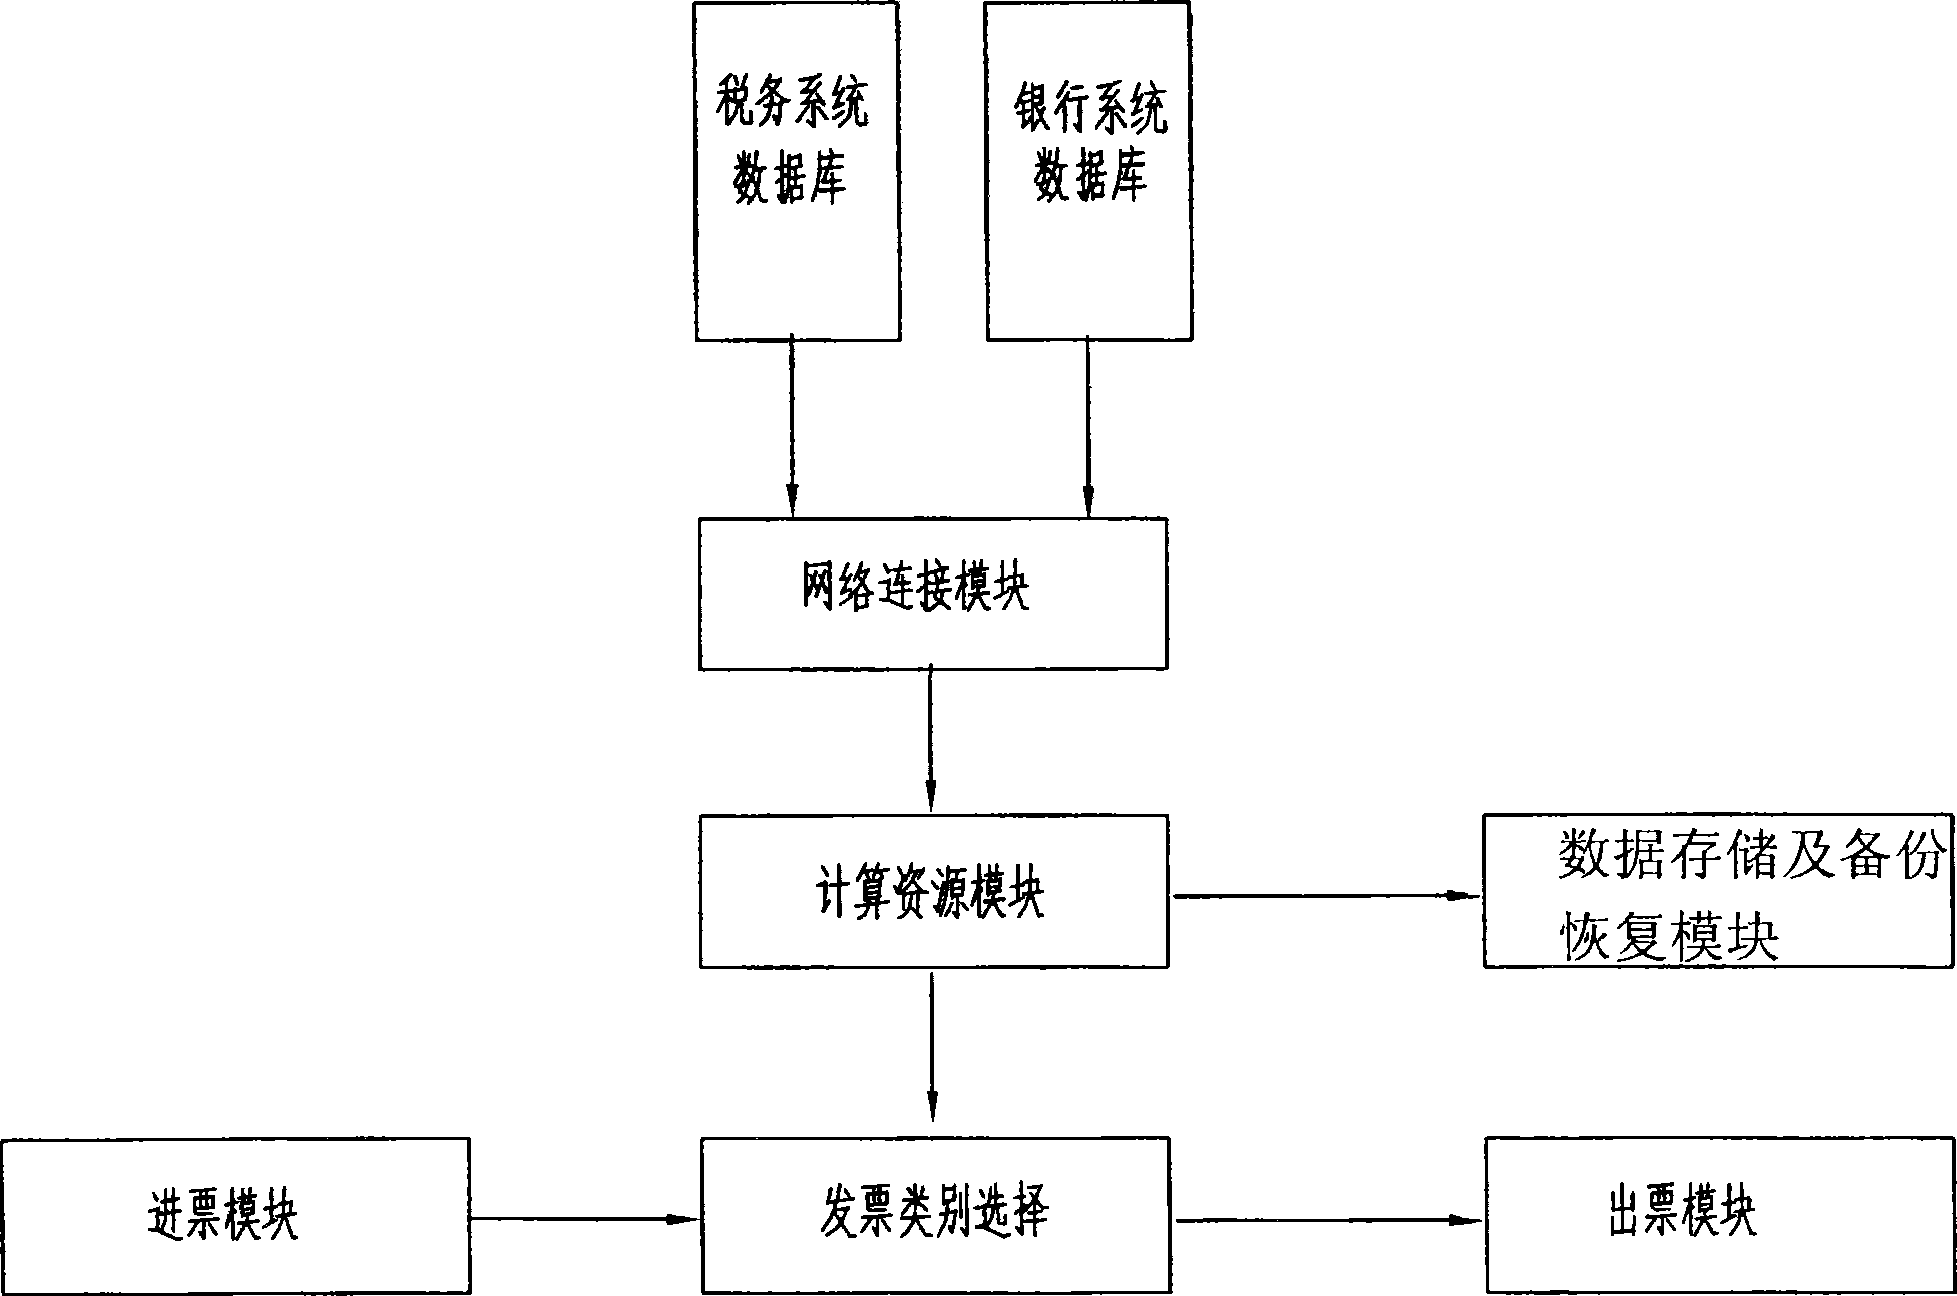 System for making out tax invoices receipt of deducting tax automatically, and application method